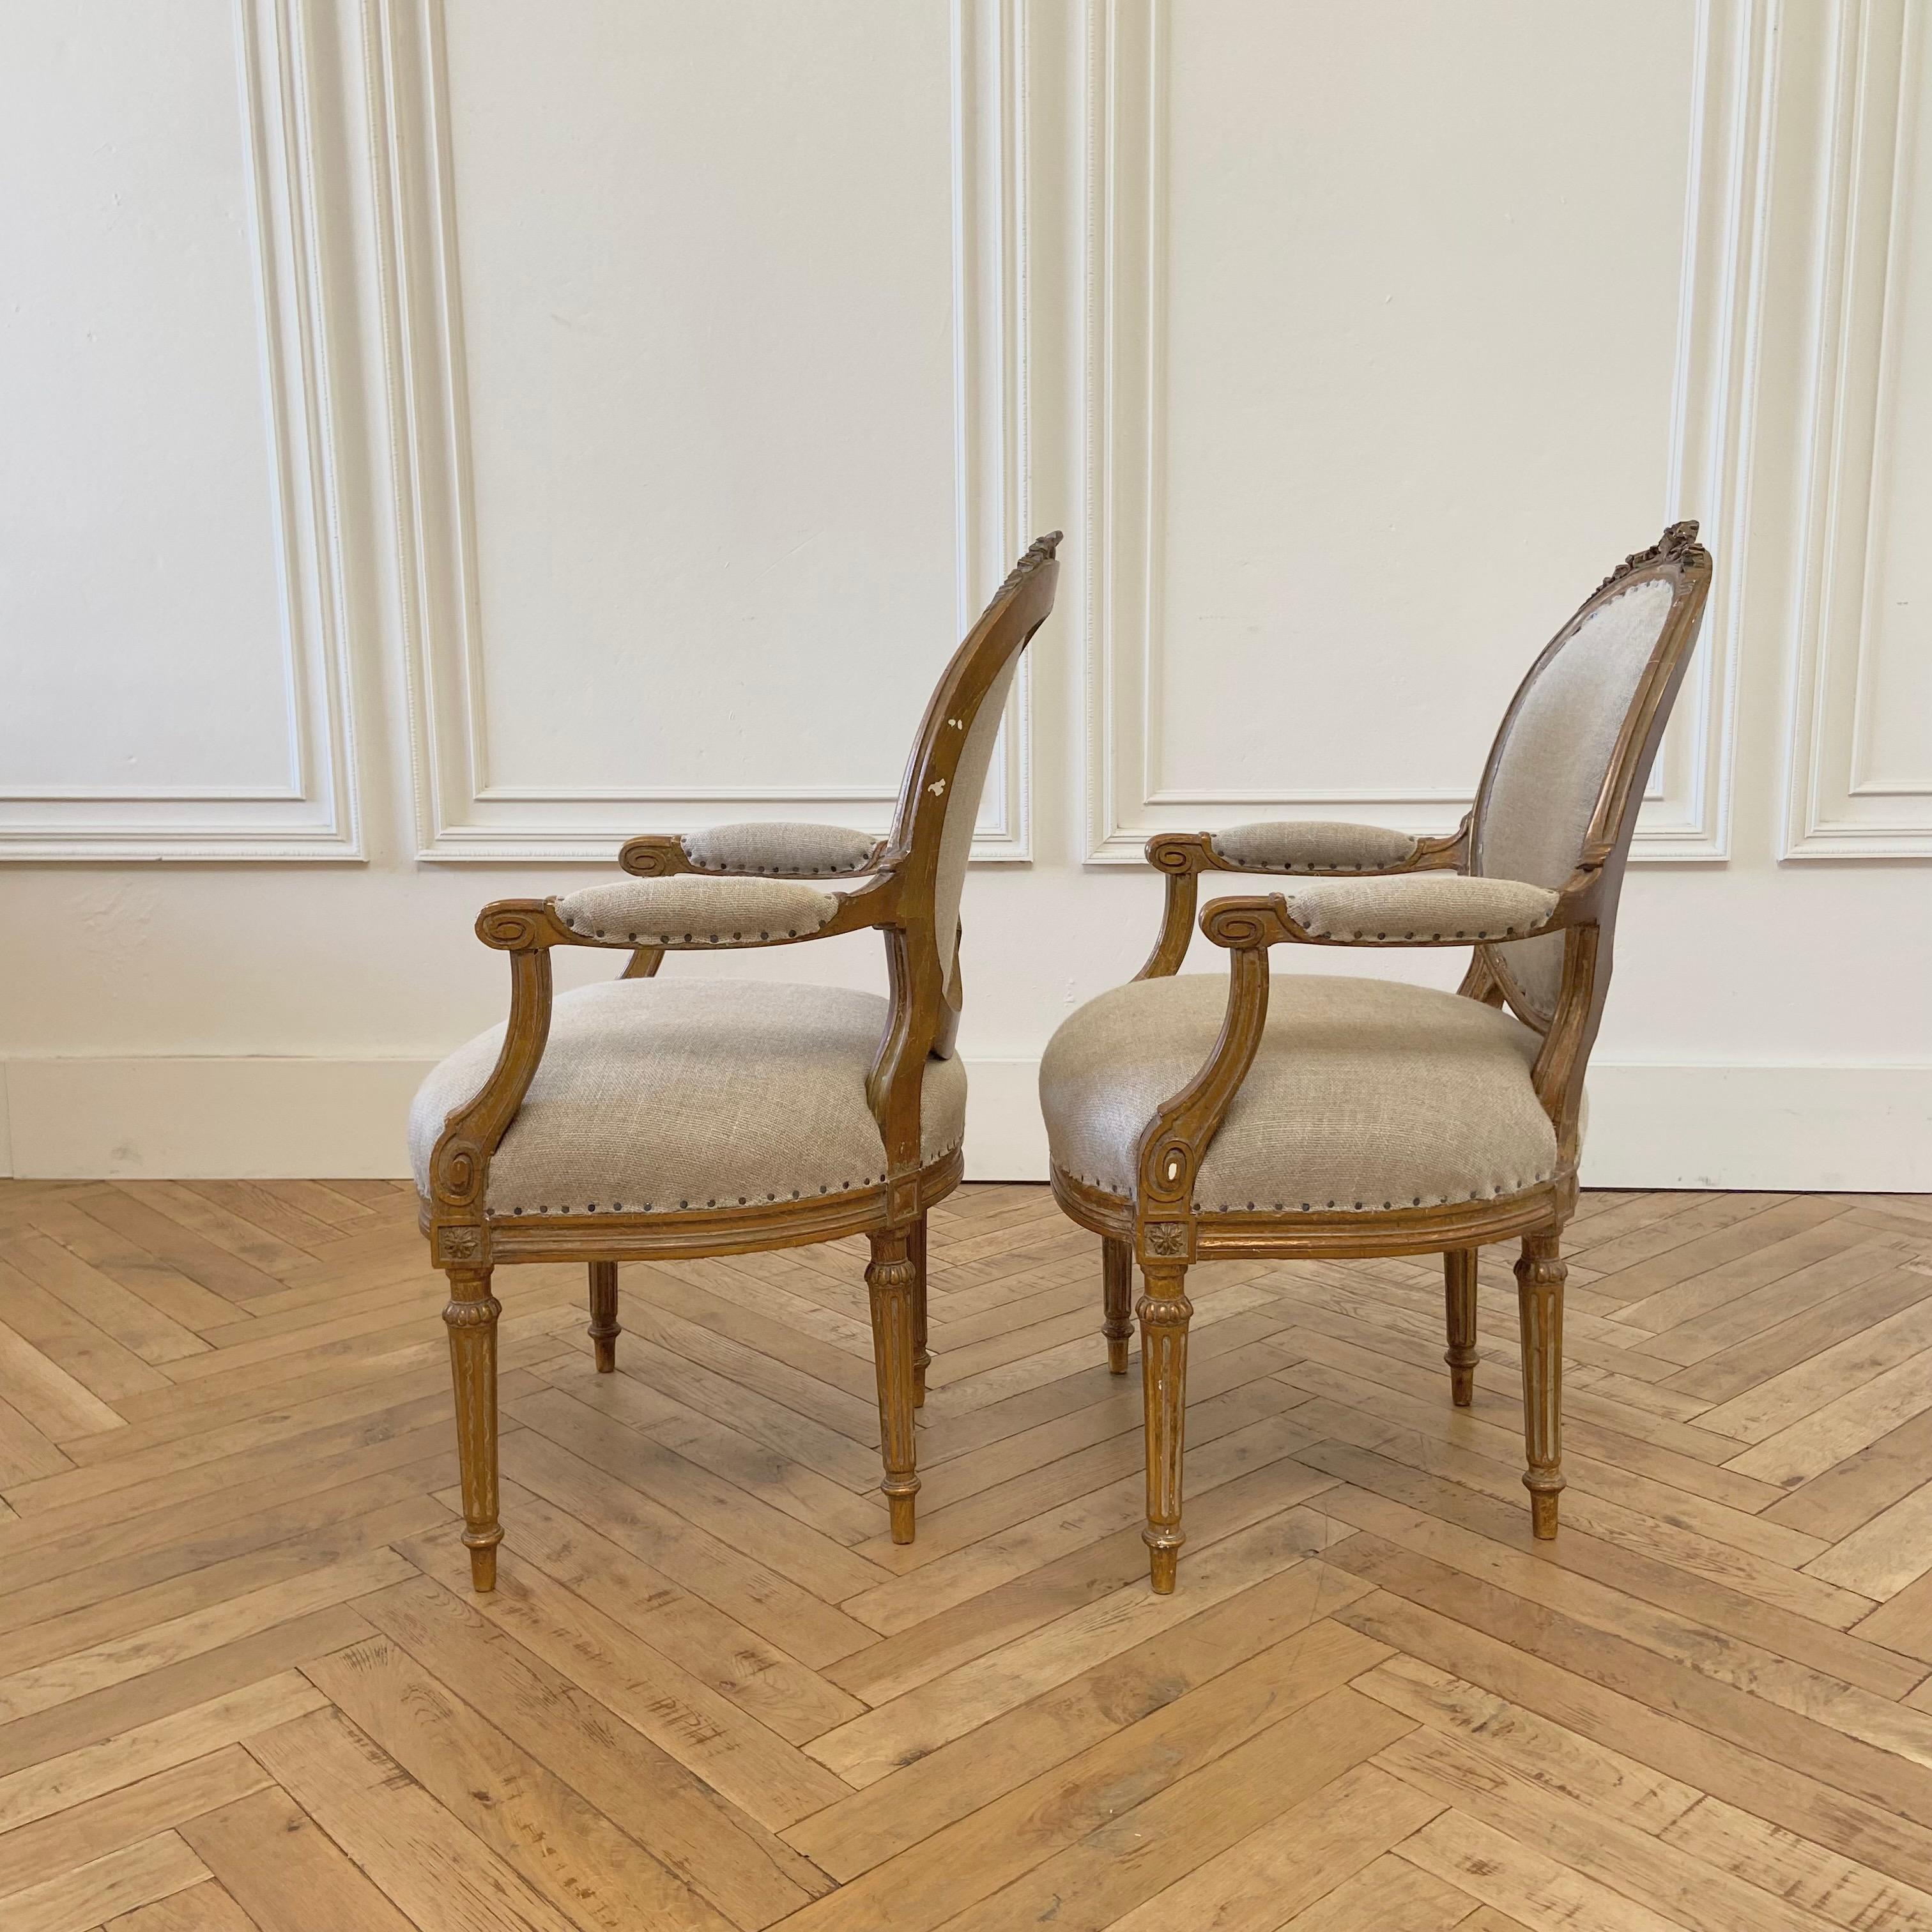 European Antique Pair of Gilt Wood Open Arm Chairs Upholstered in Natural Linen For Sale